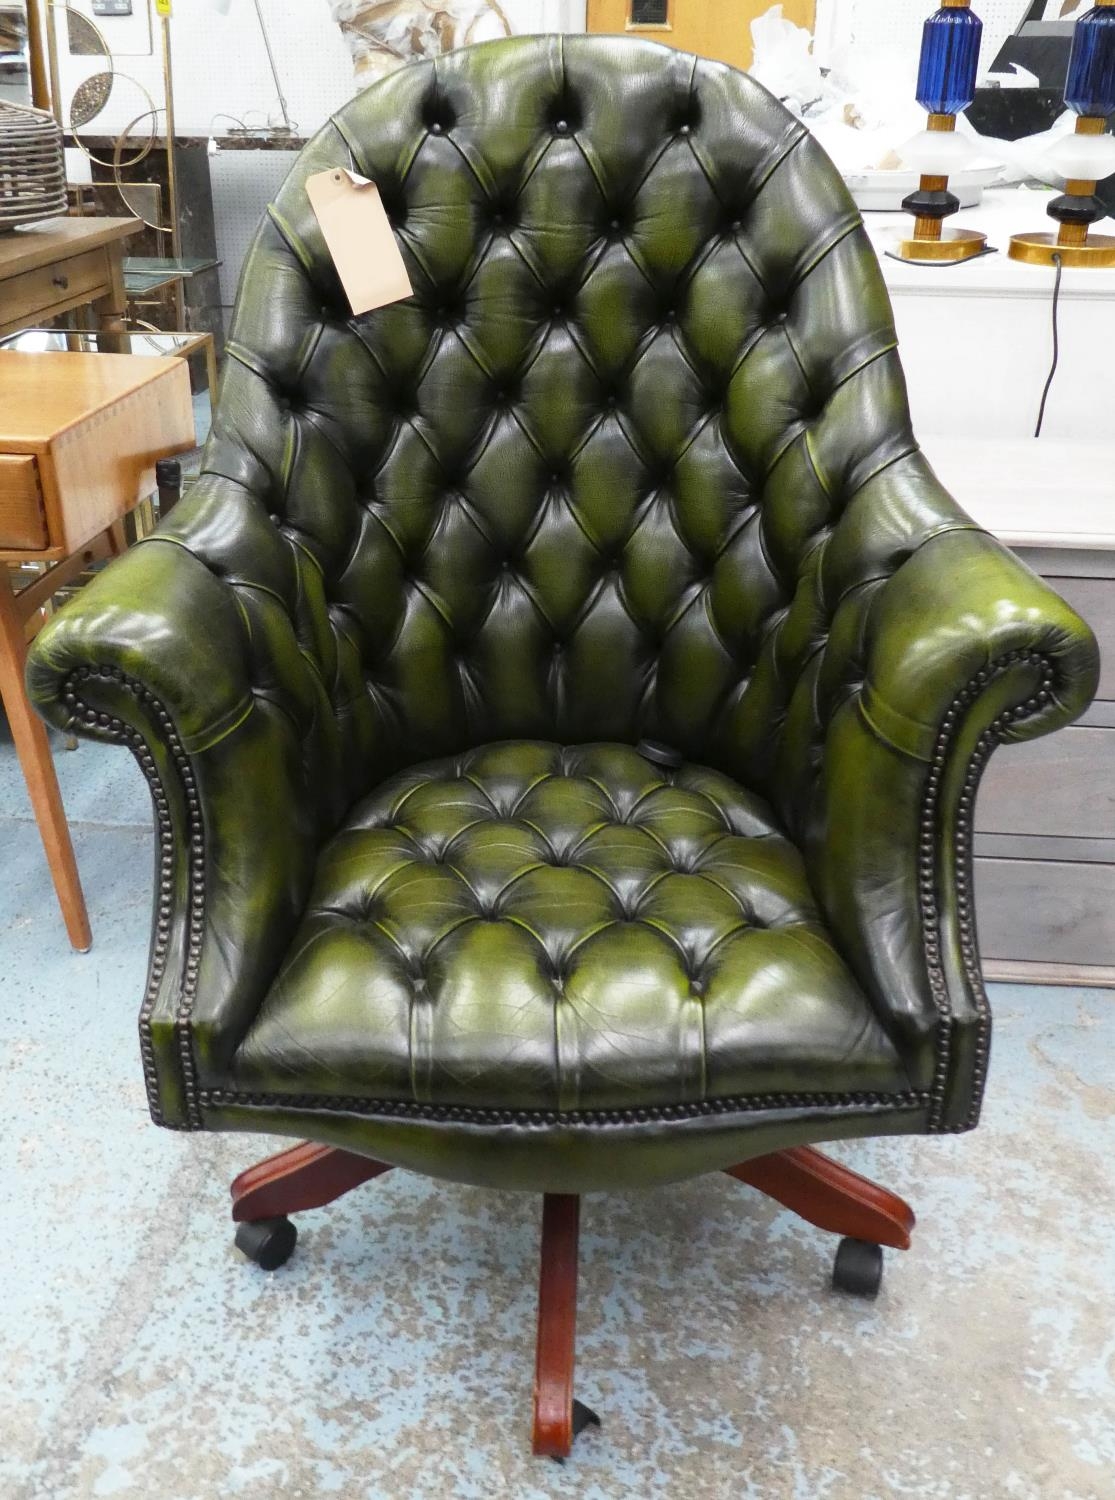 DESK CHAIR, 85cm W x 120cm H, green buttoned leather. - Image 2 of 5